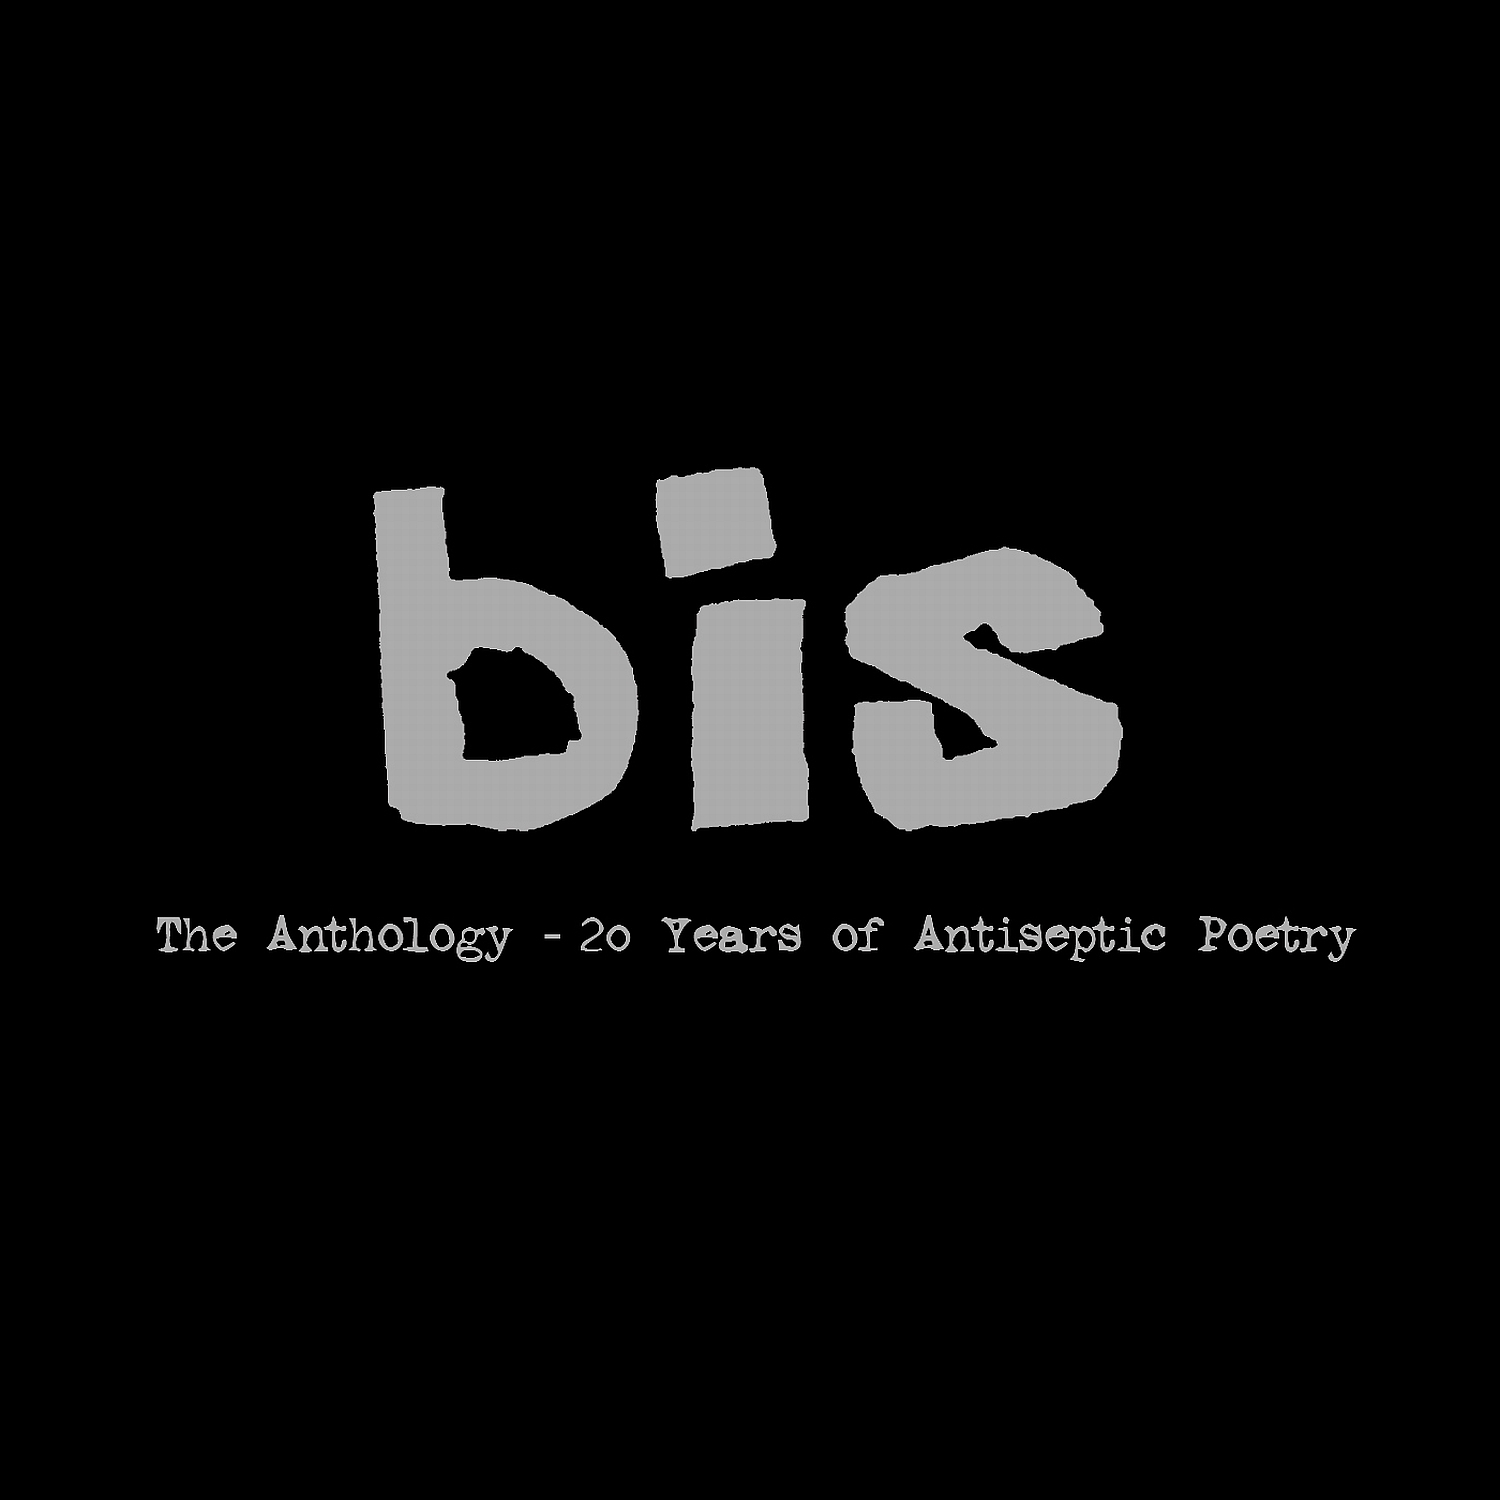 The Anthology - 20 Years of Antiseptic Poetry